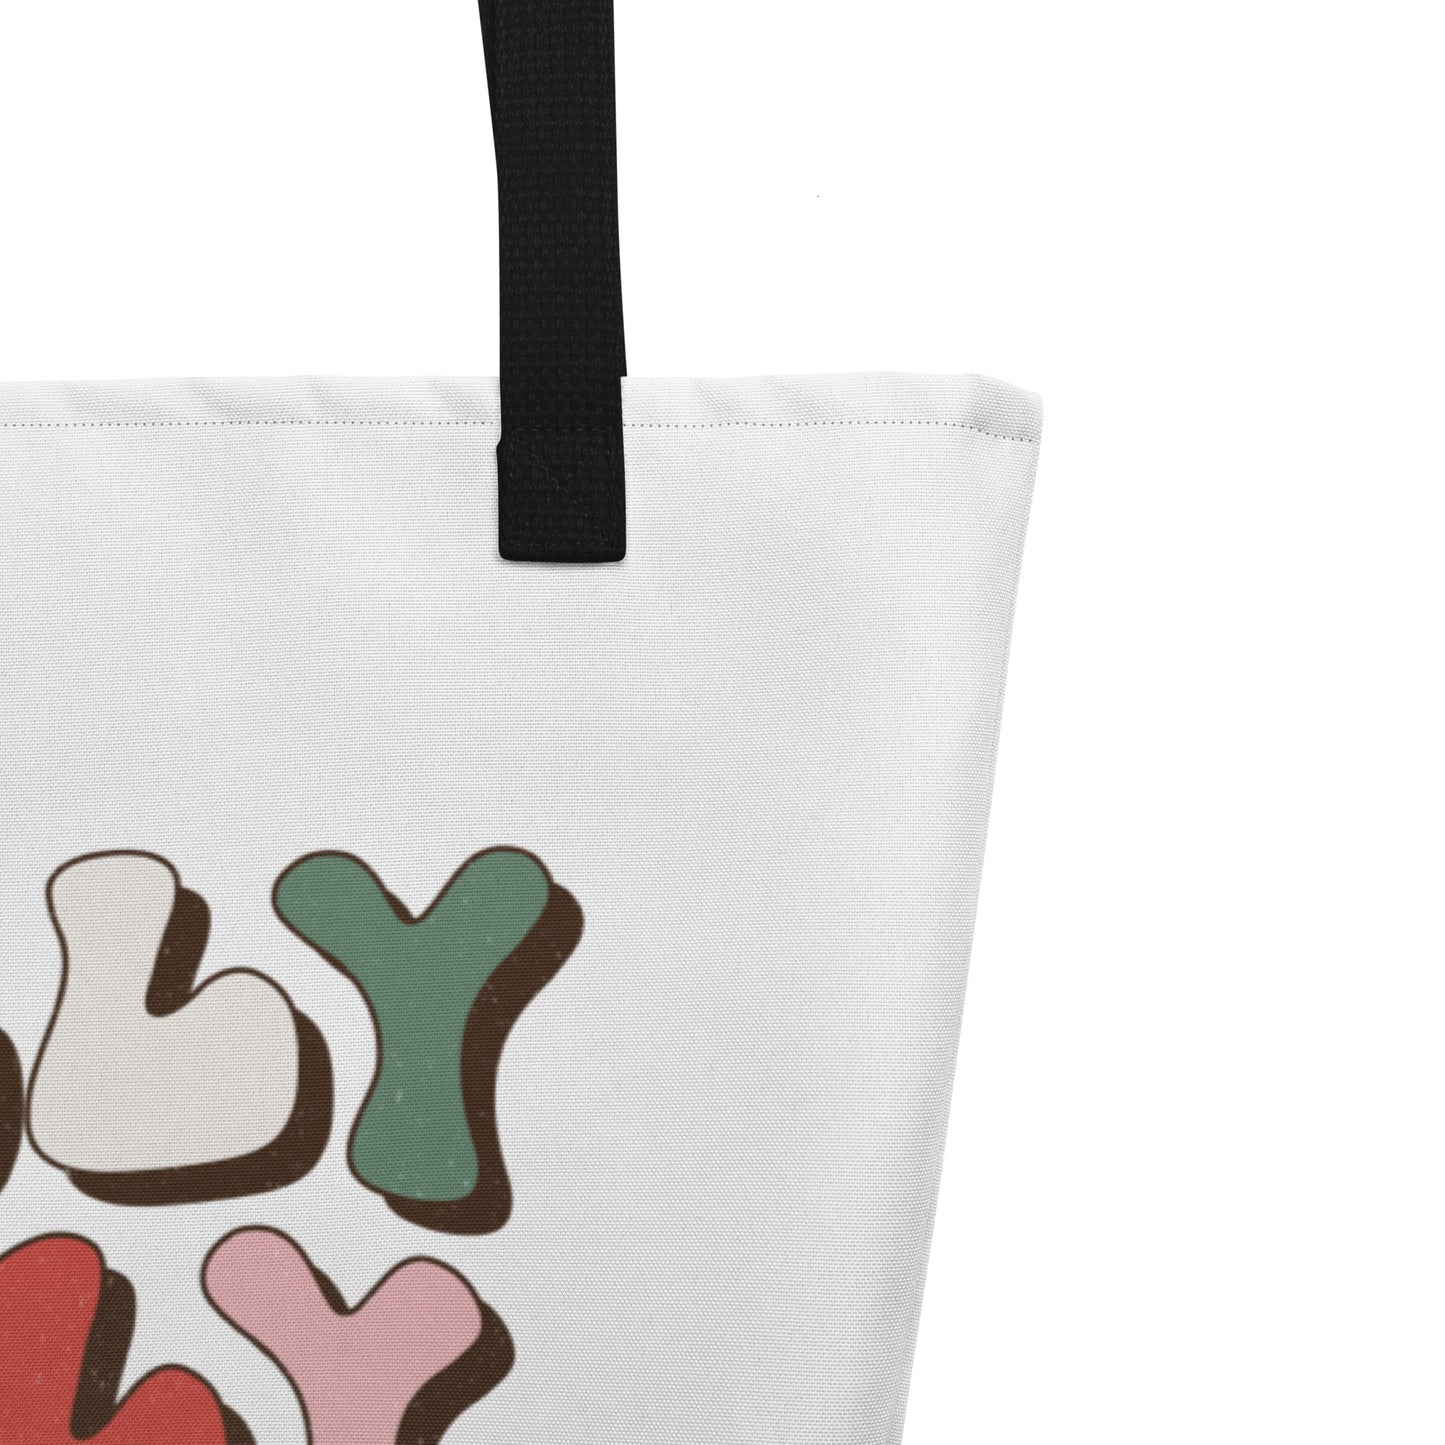 Holly Jolly Vibes All-Over Print Large Tote Bag